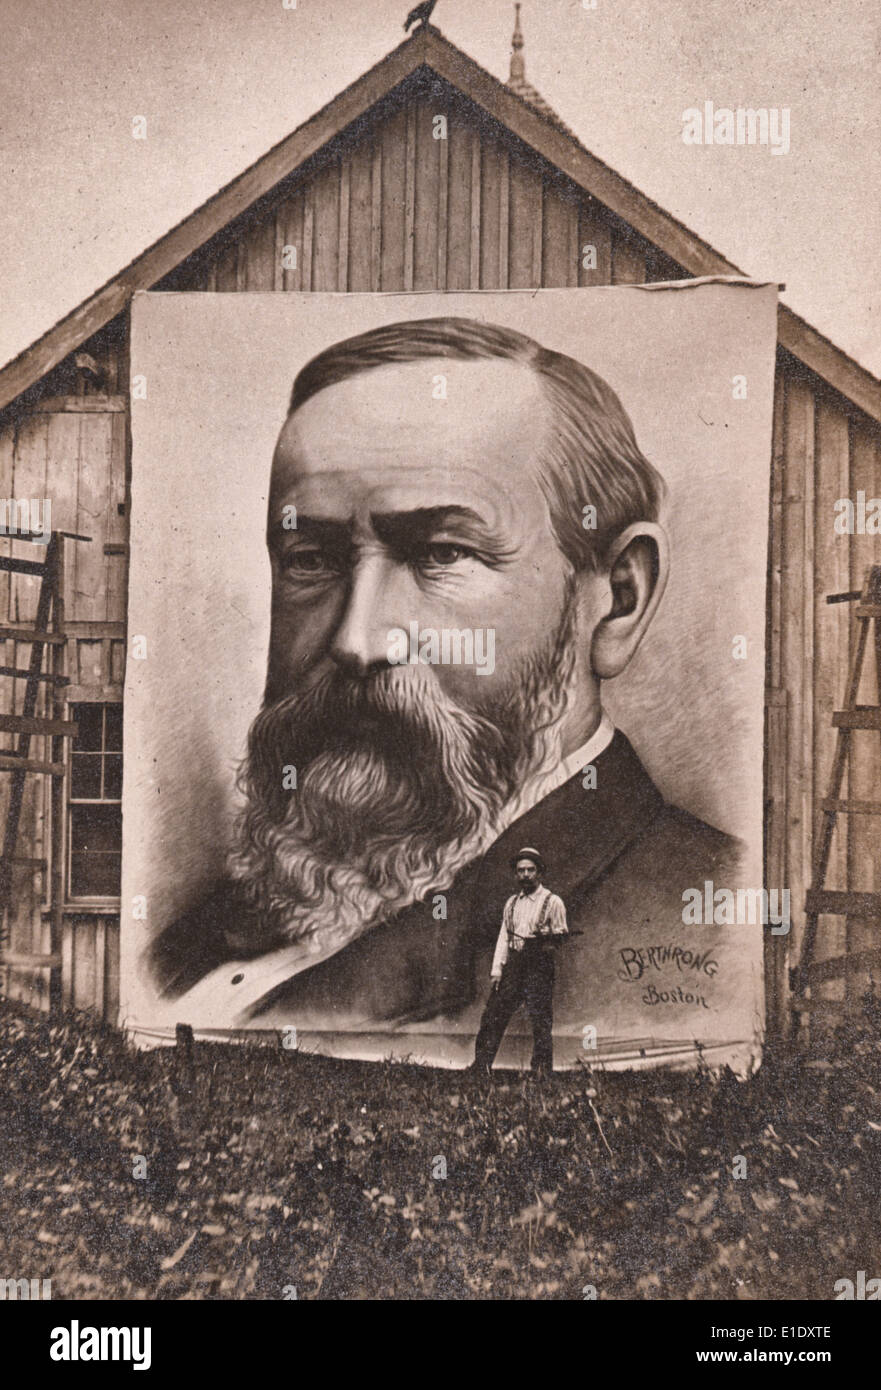 Enormous painting of President Benjamin Harrison displayed on the side of a barn with the artist standing next to it. The artist signed the portrait 'Berthrong Boston.' Stock Photo